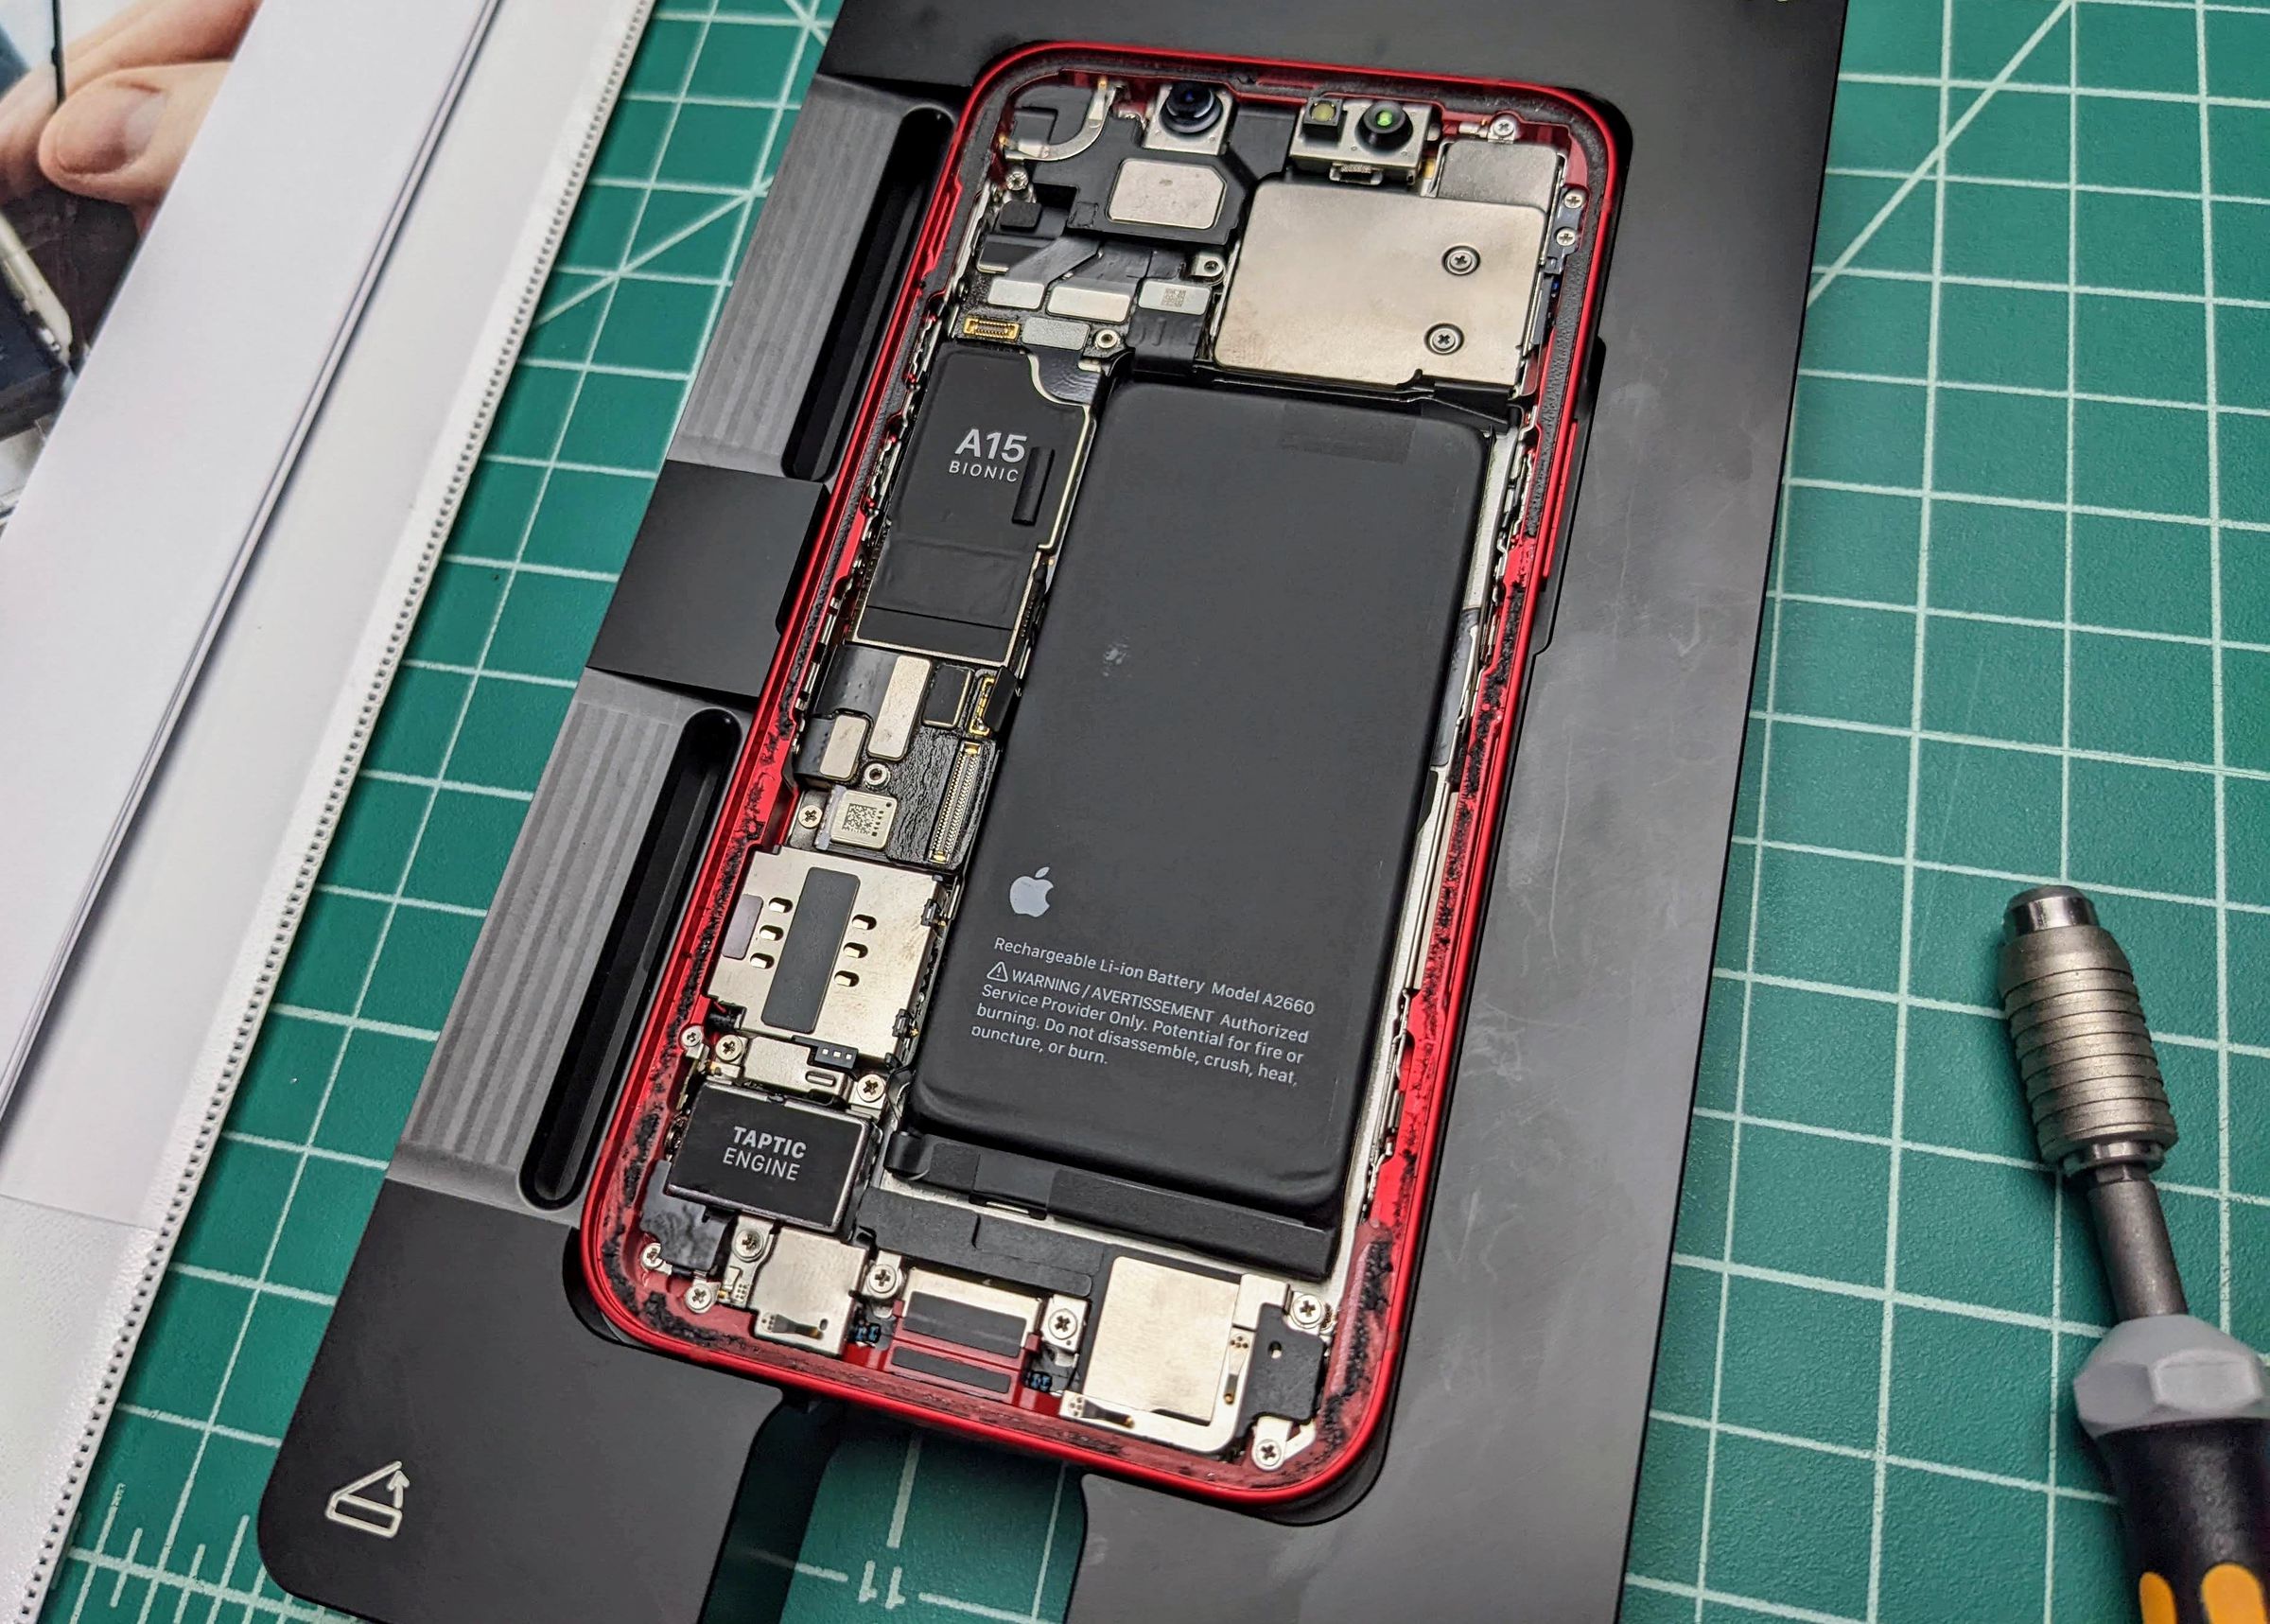 Photo of an iPhone with its battery exposed.